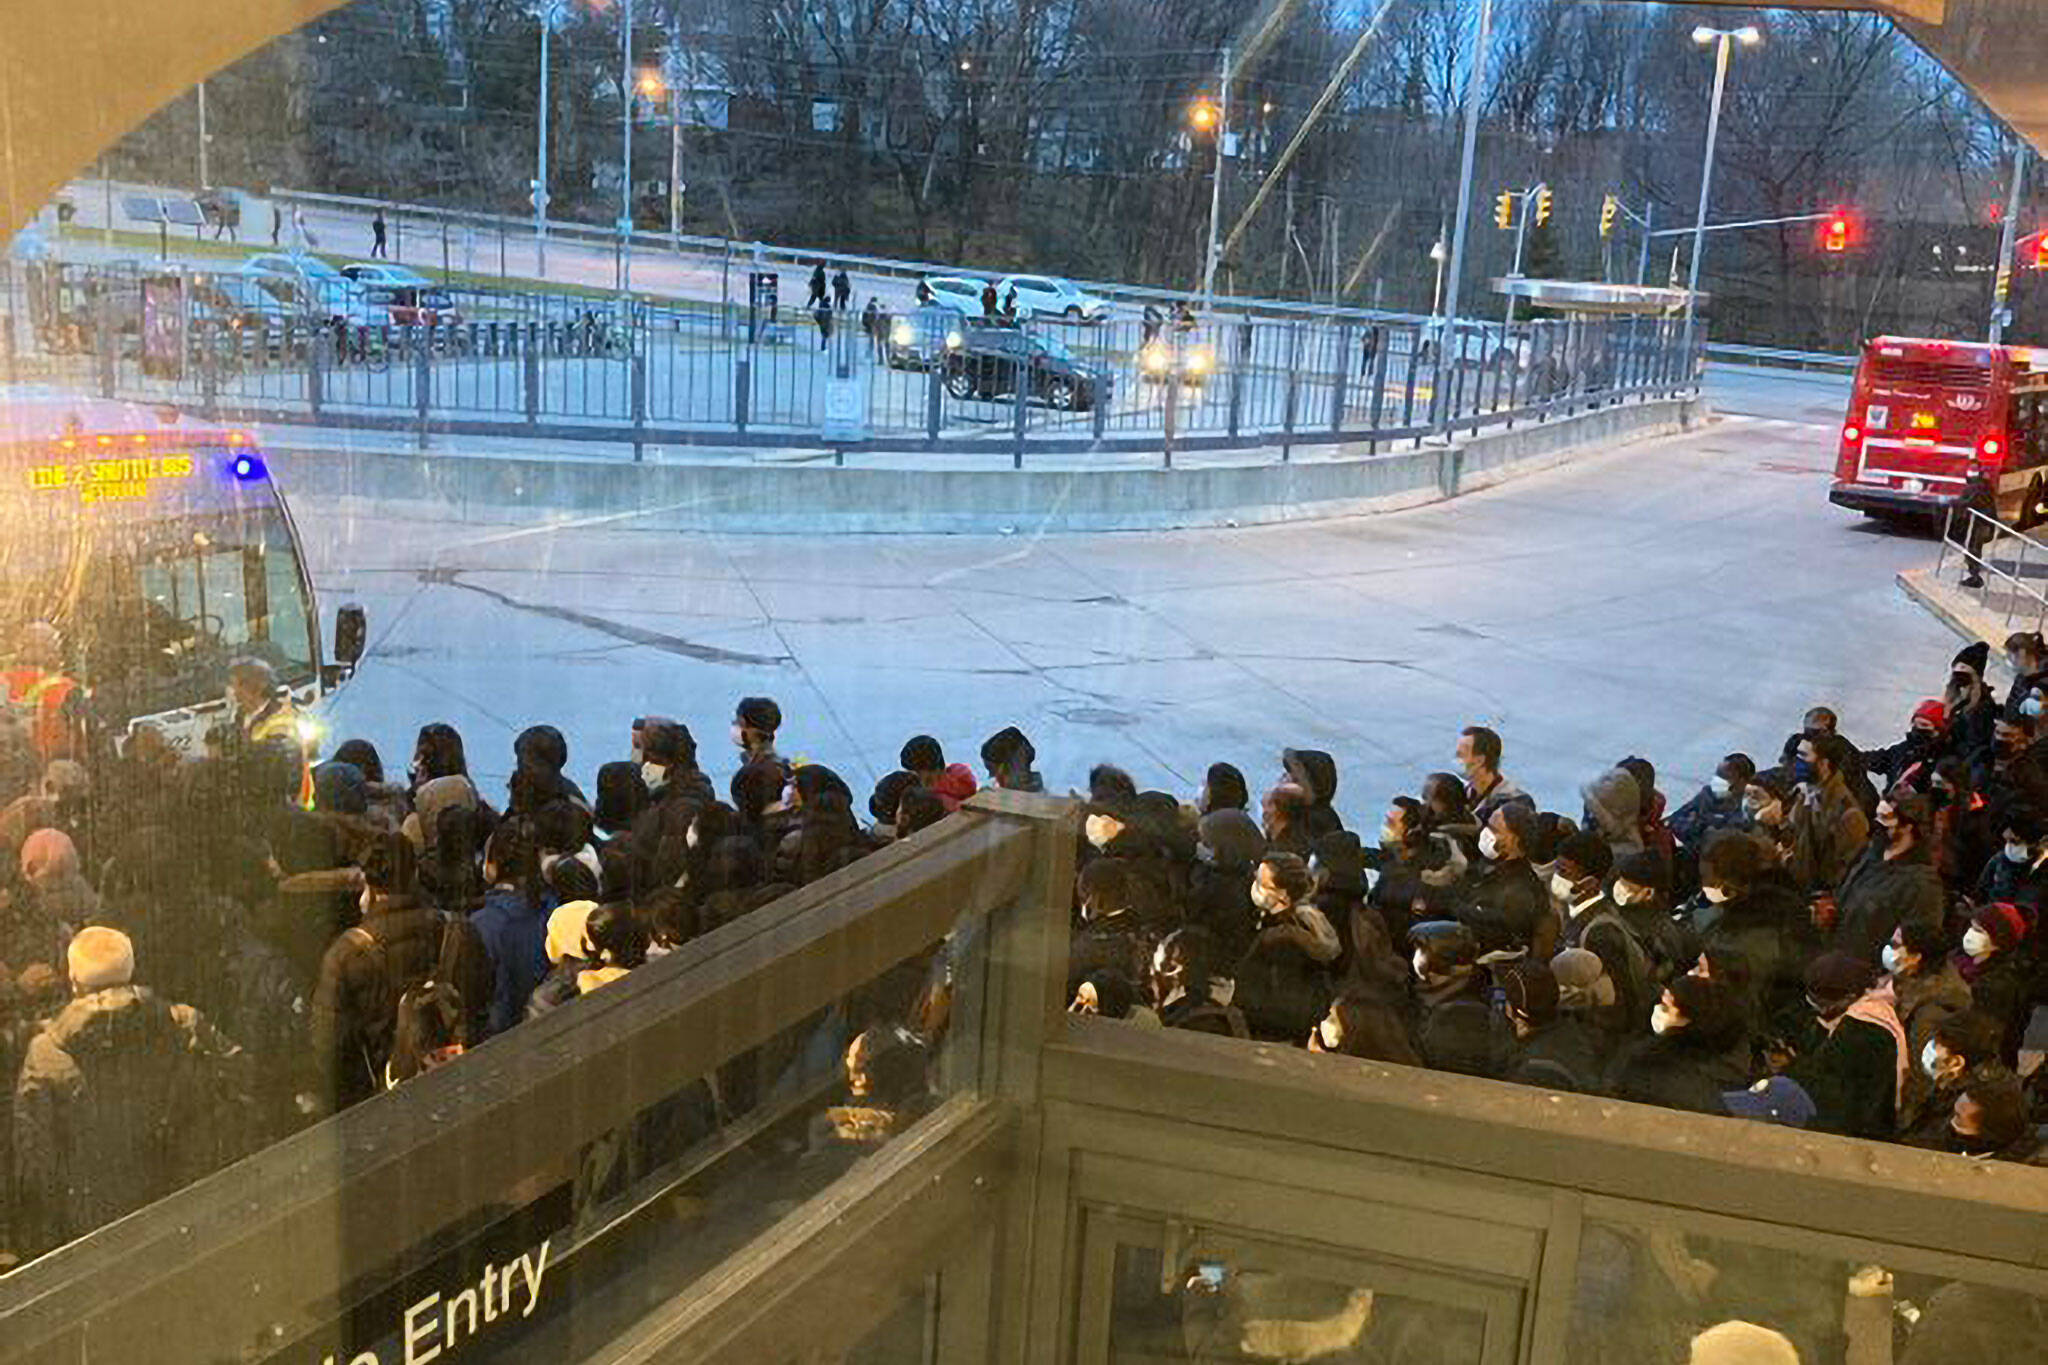 Huge TTC service outage throws Toronto morning rush hour into chaos